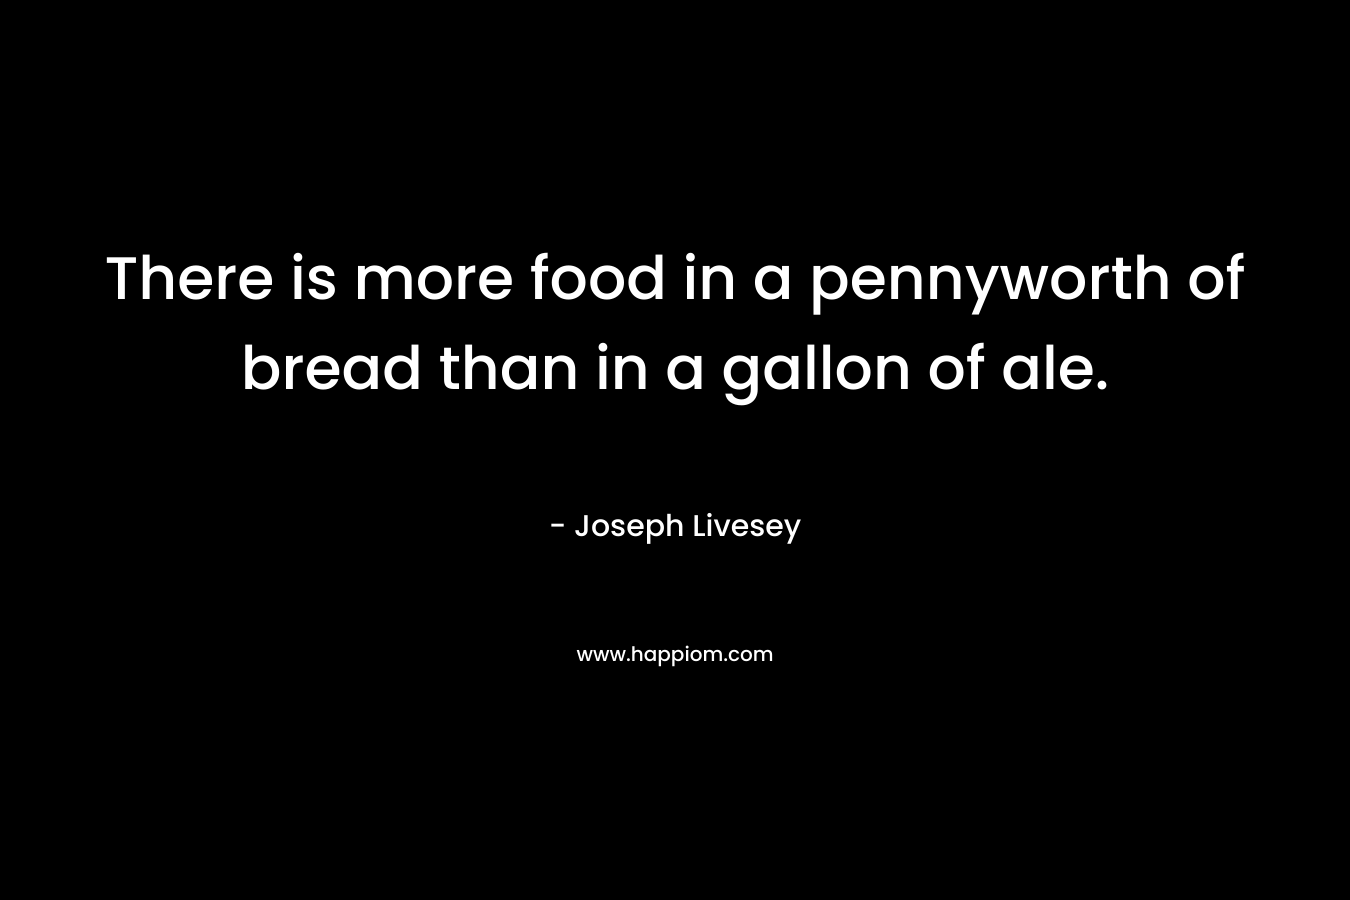 There is more food in a pennyworth of bread than in a gallon of ale.